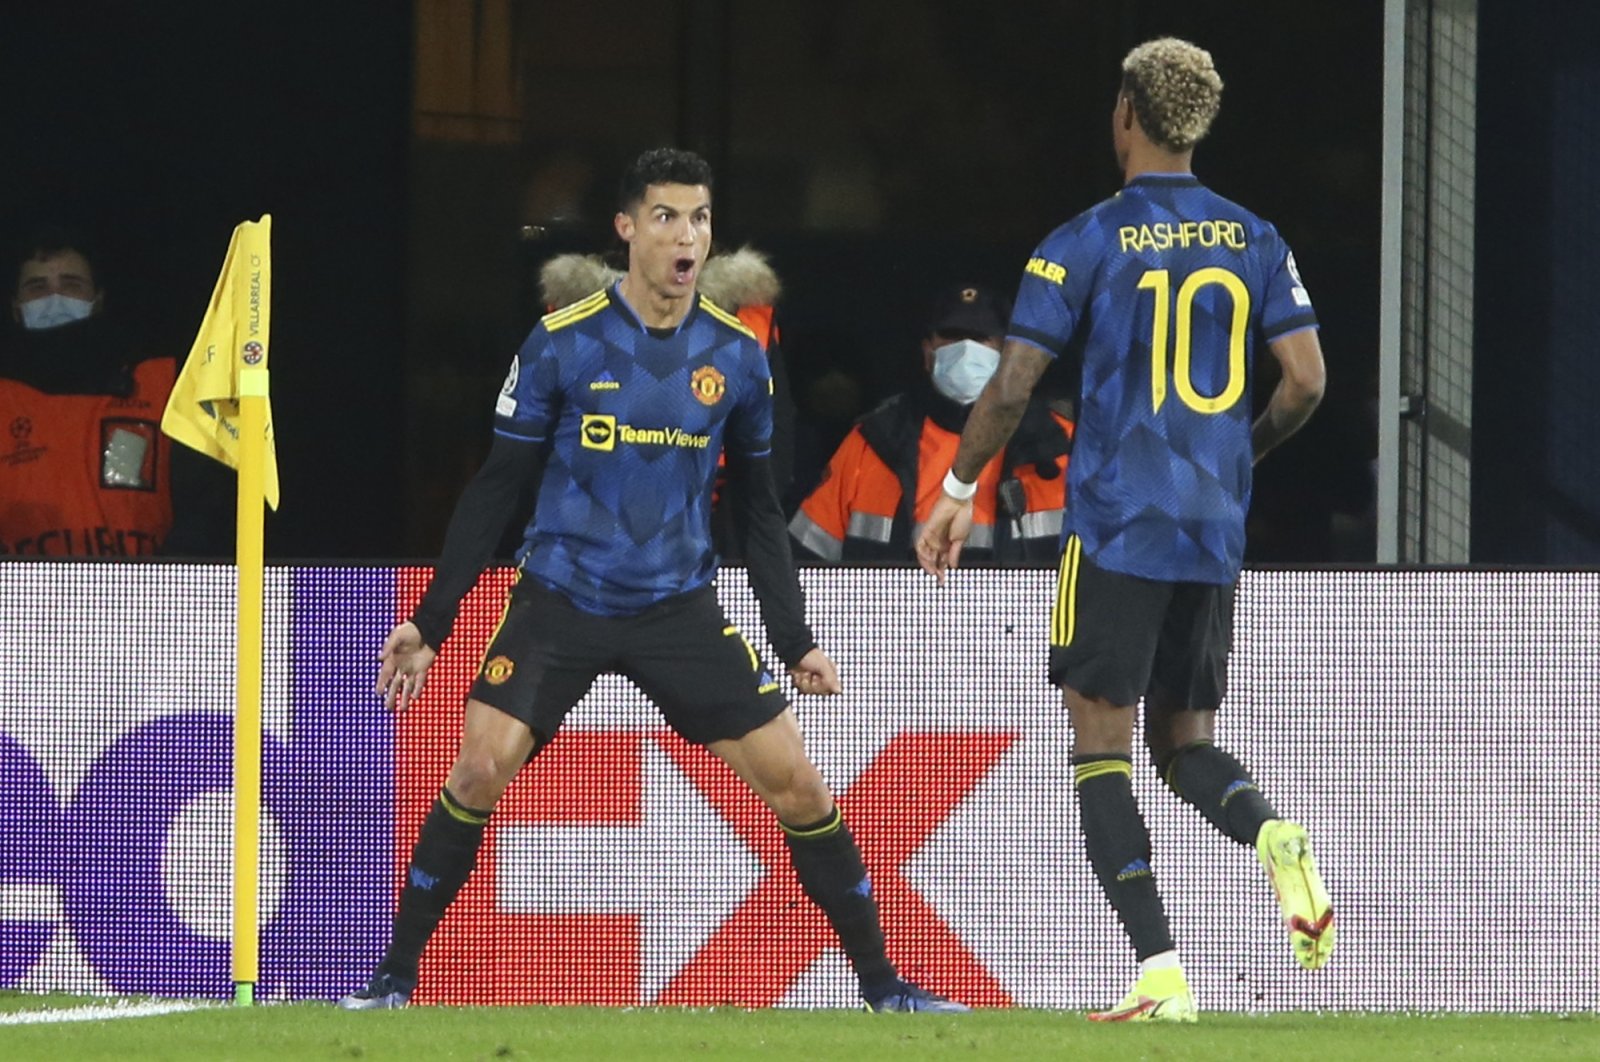 Manchester United&#039;s Cristiano Ronaldo (L) celebrates with Marcus Rashford after scoring in a Champions League match against Villarreal at the Ceramica stadium in Villarreal, Spain, Nov. 23, 2021. (AP Photo)